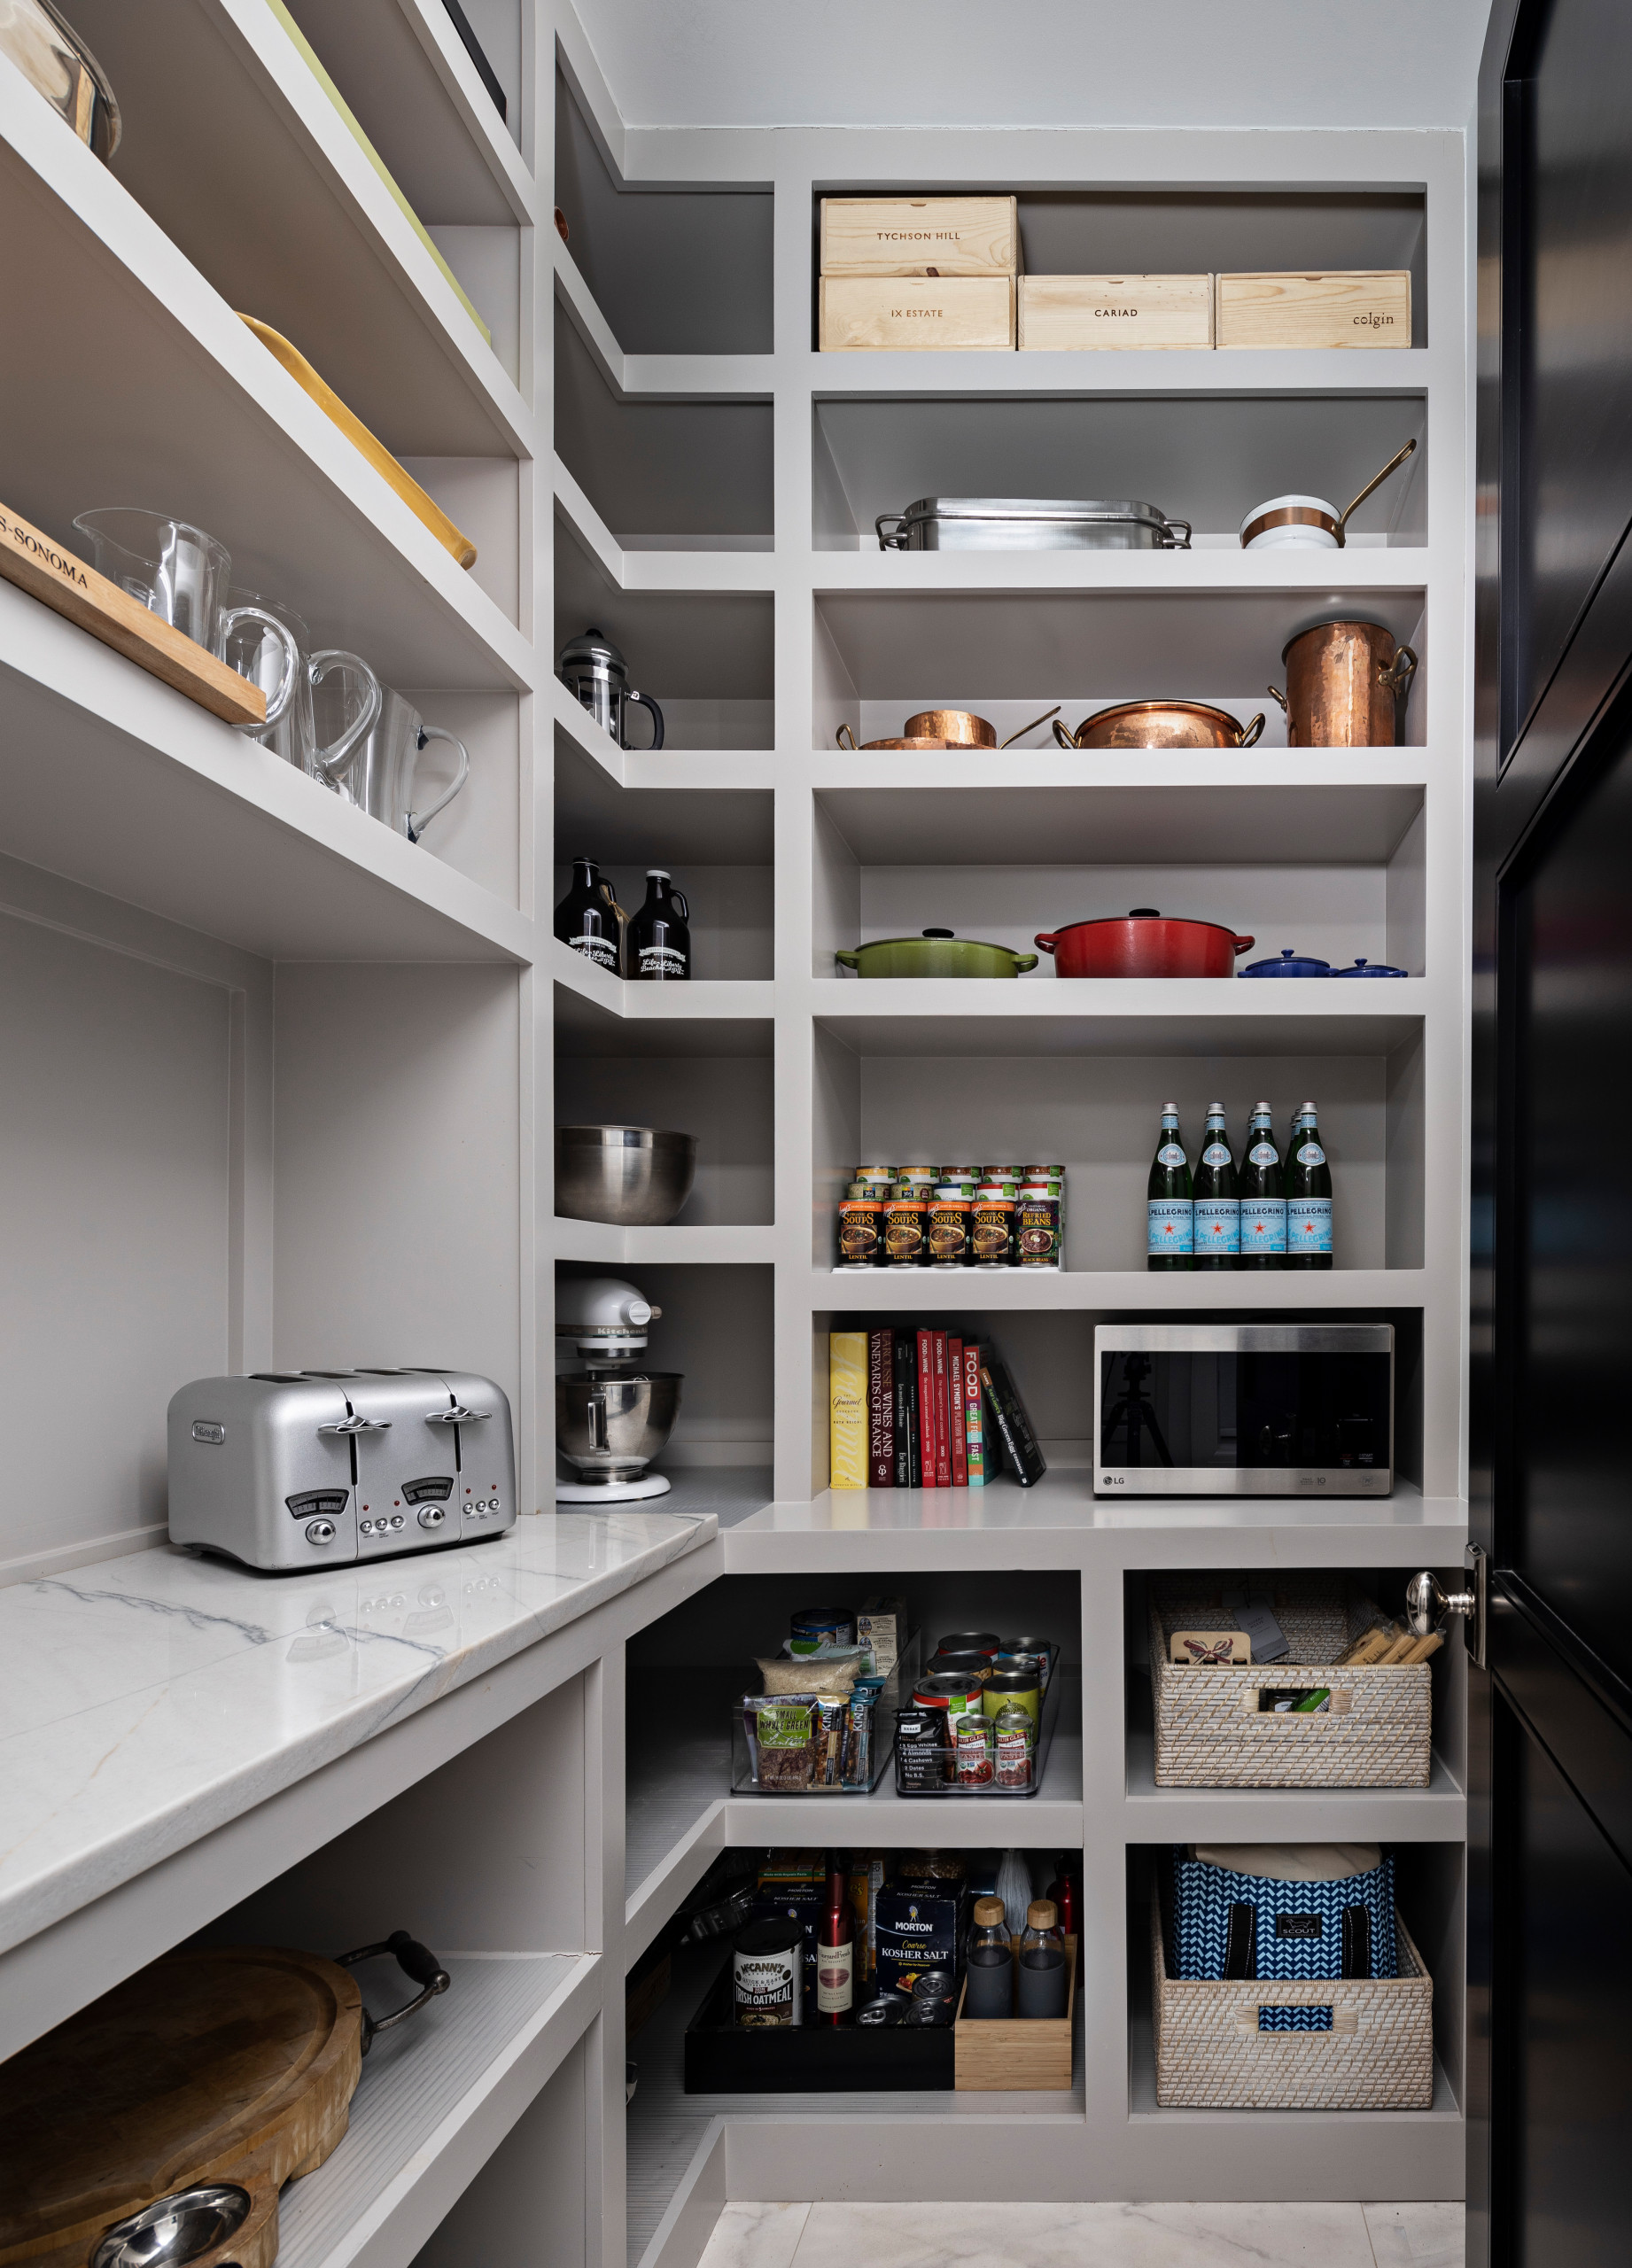 These days, we design the Butler’s Pantry and Walk In Pantry to do the “heavy lifting” ?? for the kitchen. With undercounter refrigerators, appliance stations, built-in microwaves, these back-kitchen